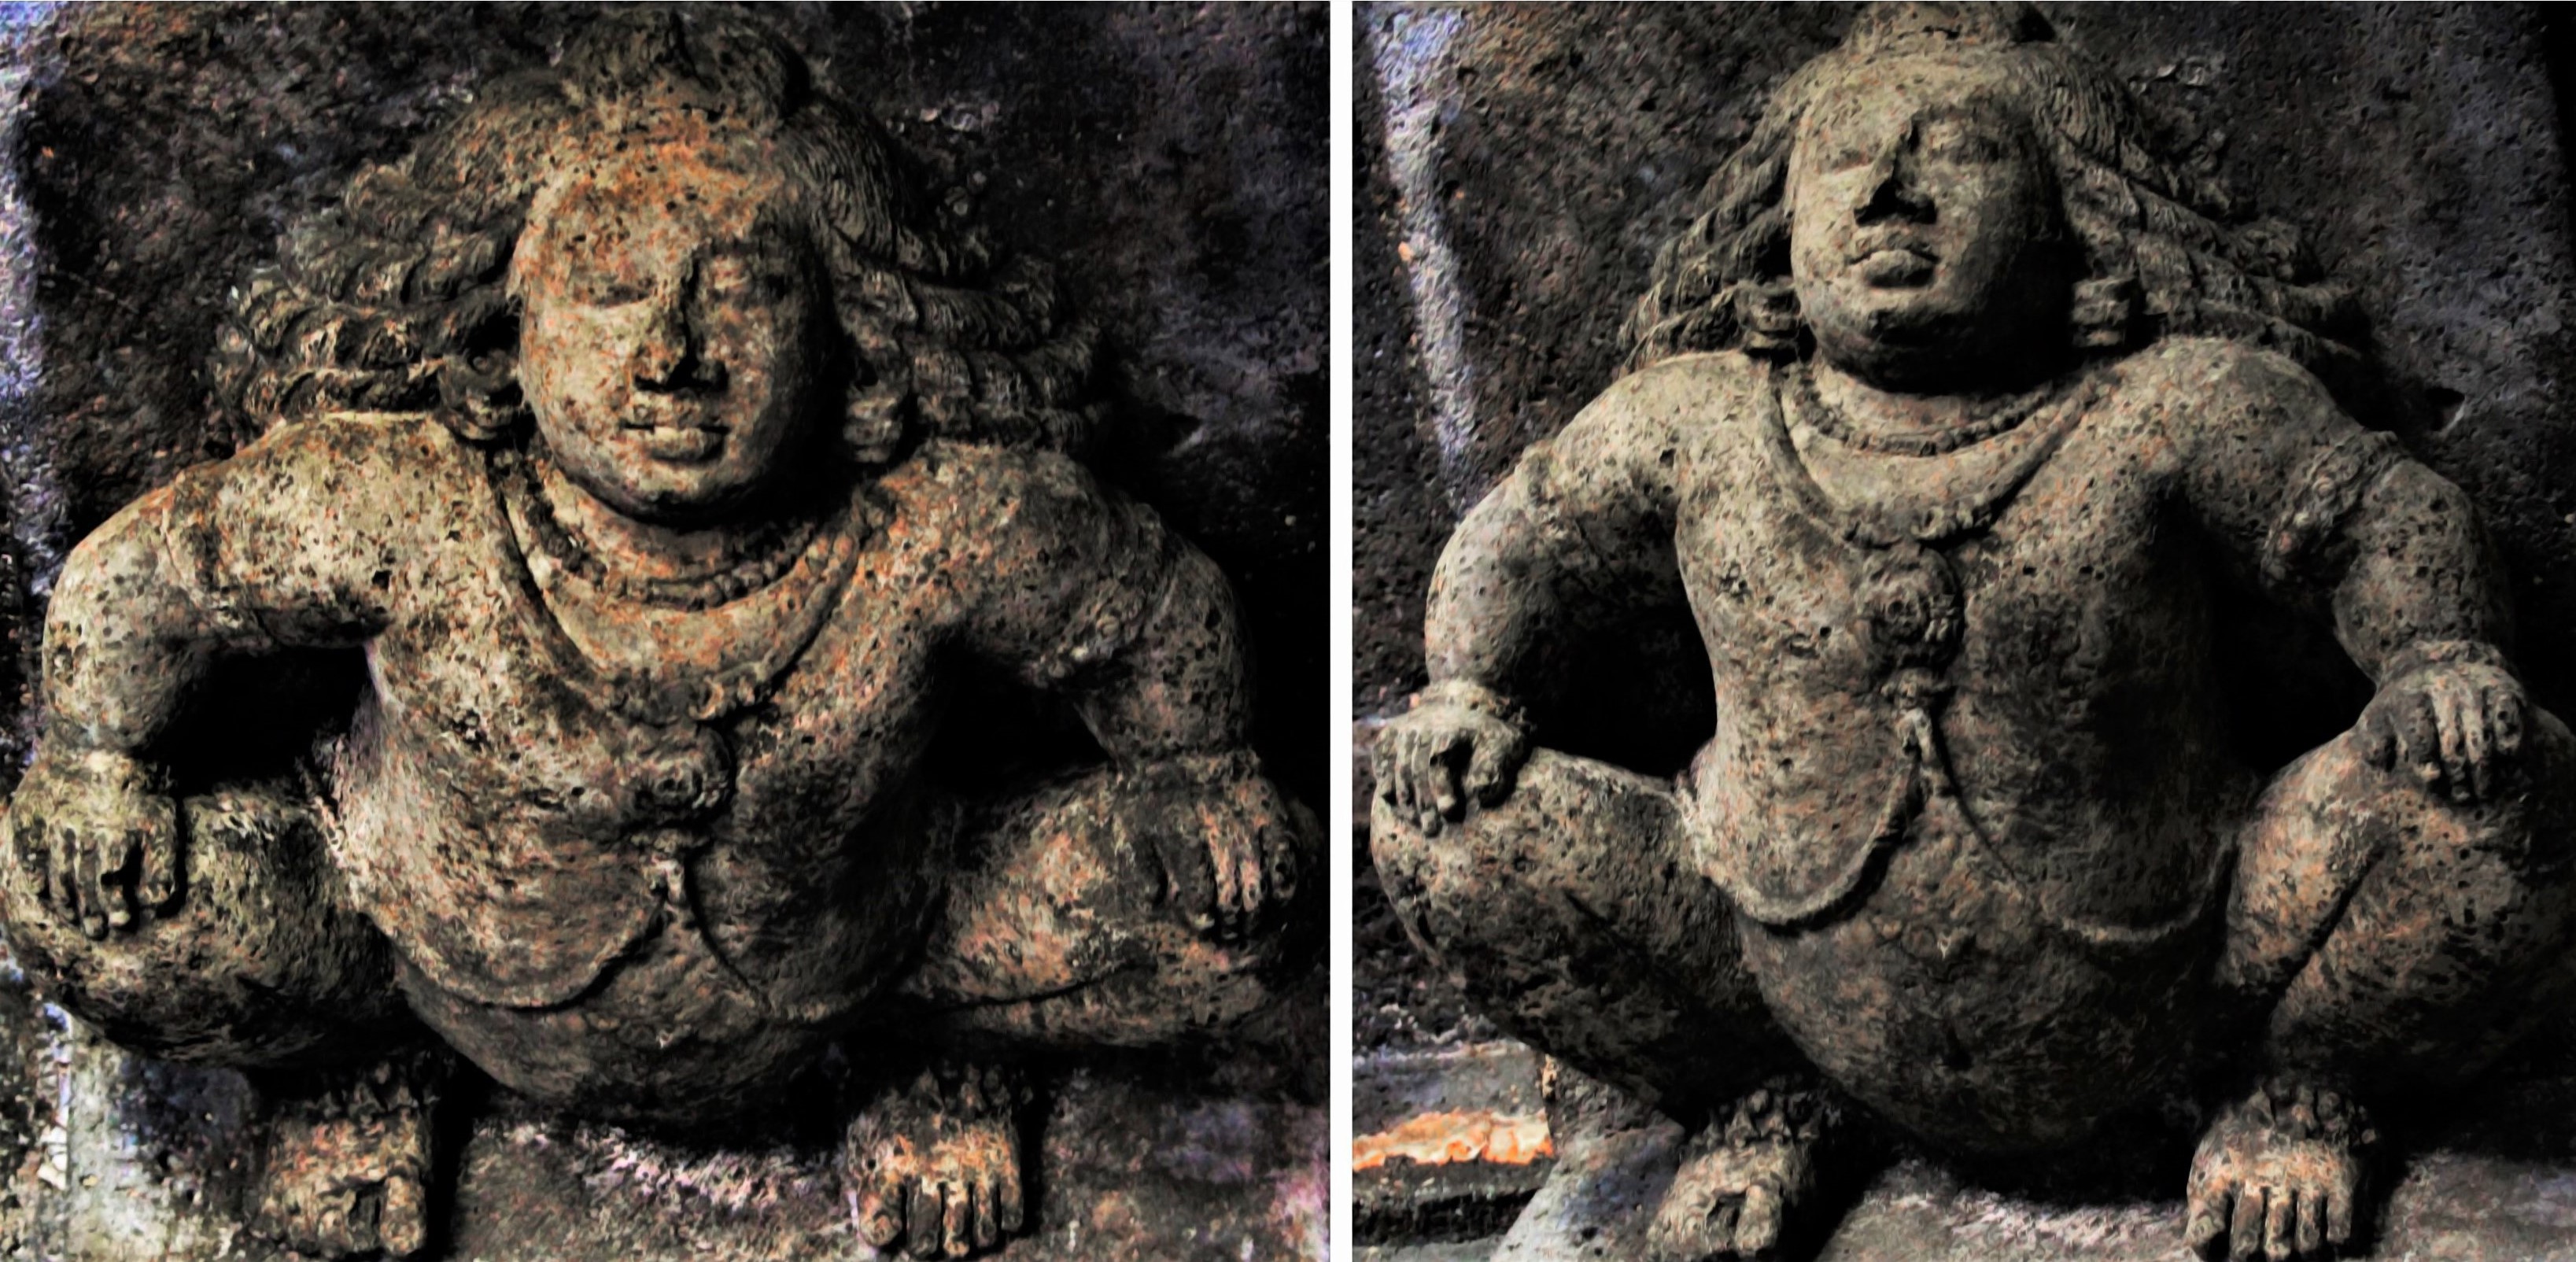 Various Yaksha Figures including Bharvahaka Yakshas. All the sculptures can be seen on the ceiling of Cave 16